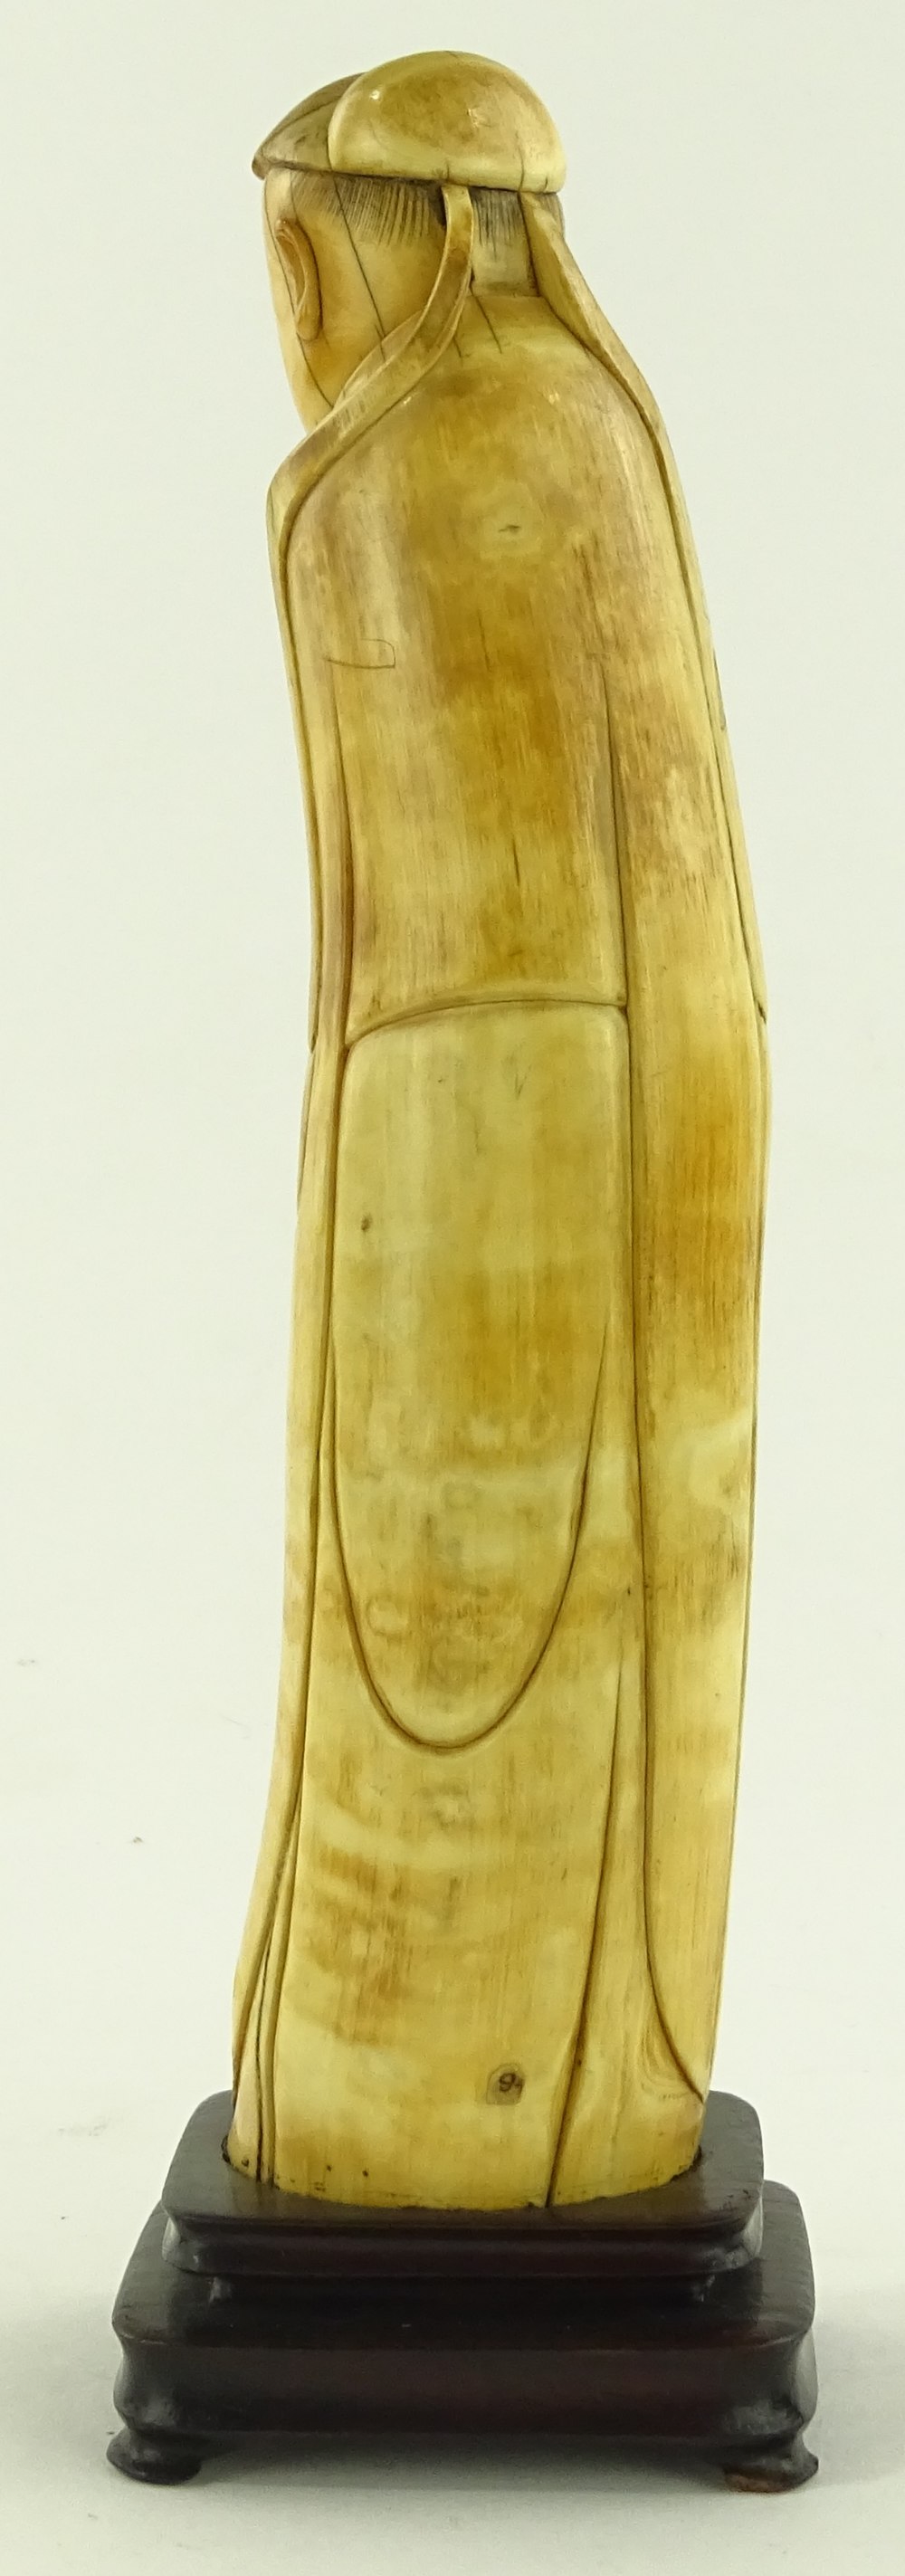 A 17th century carved ivory figure of a monk, with - Image 2 of 3